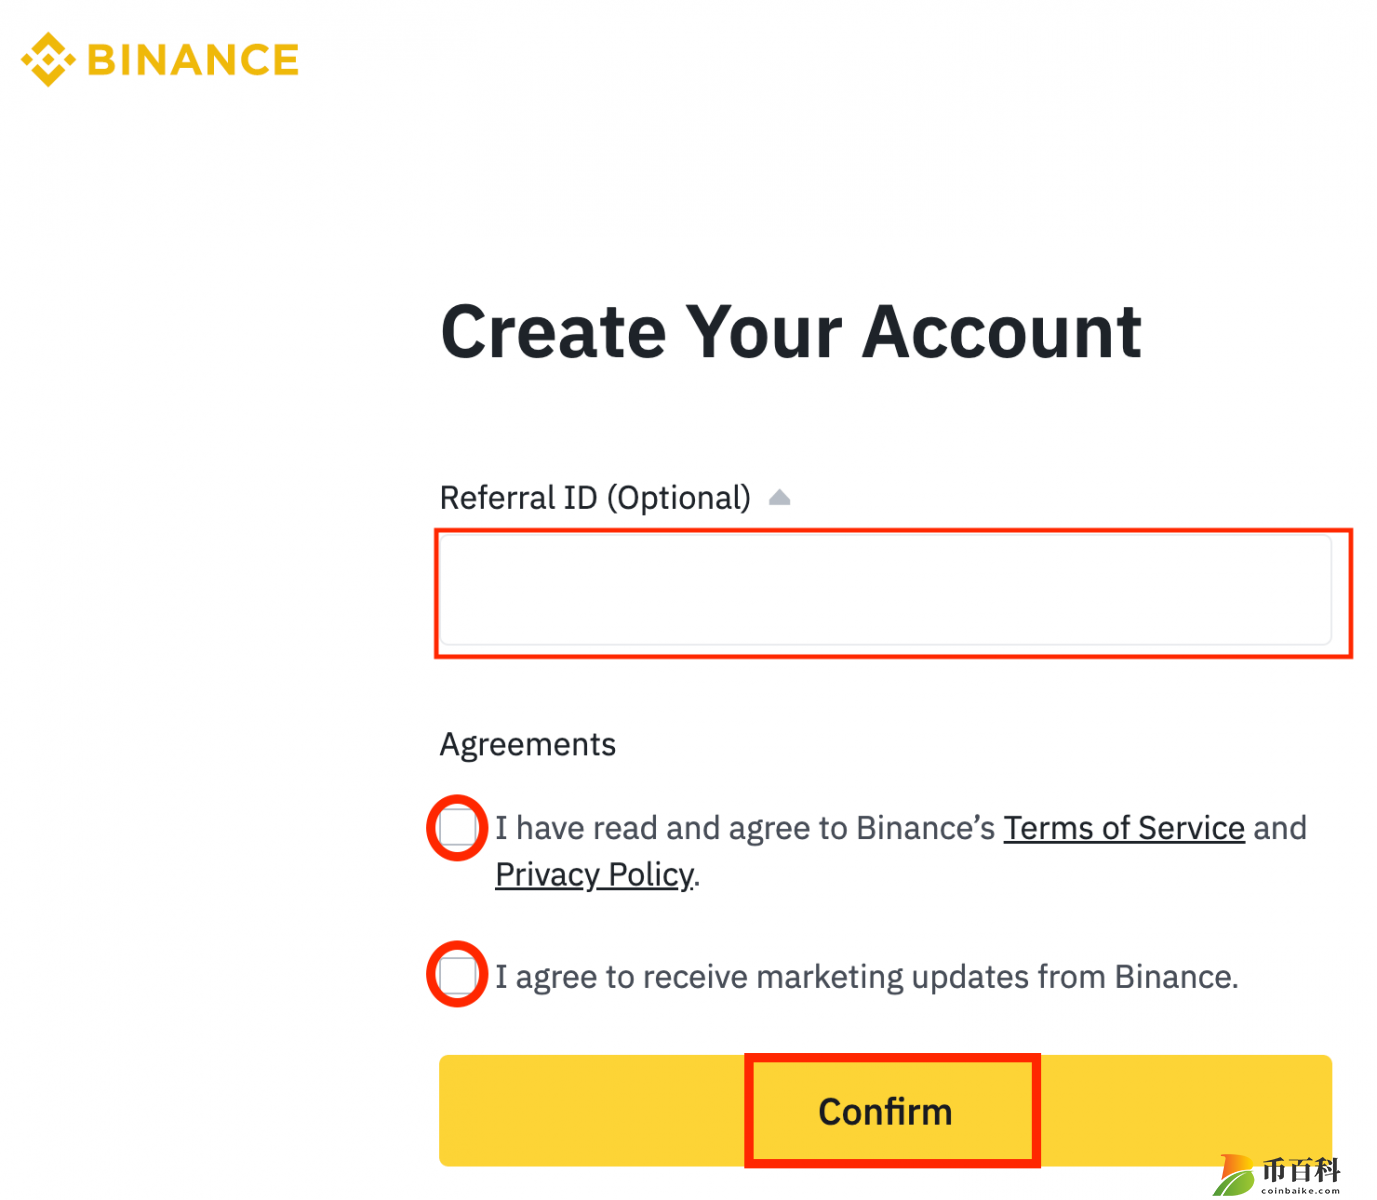 a8a2048676a587a771a3717ff5206865_how-to-register-and-login-account-on-binance-1685104028-17.png